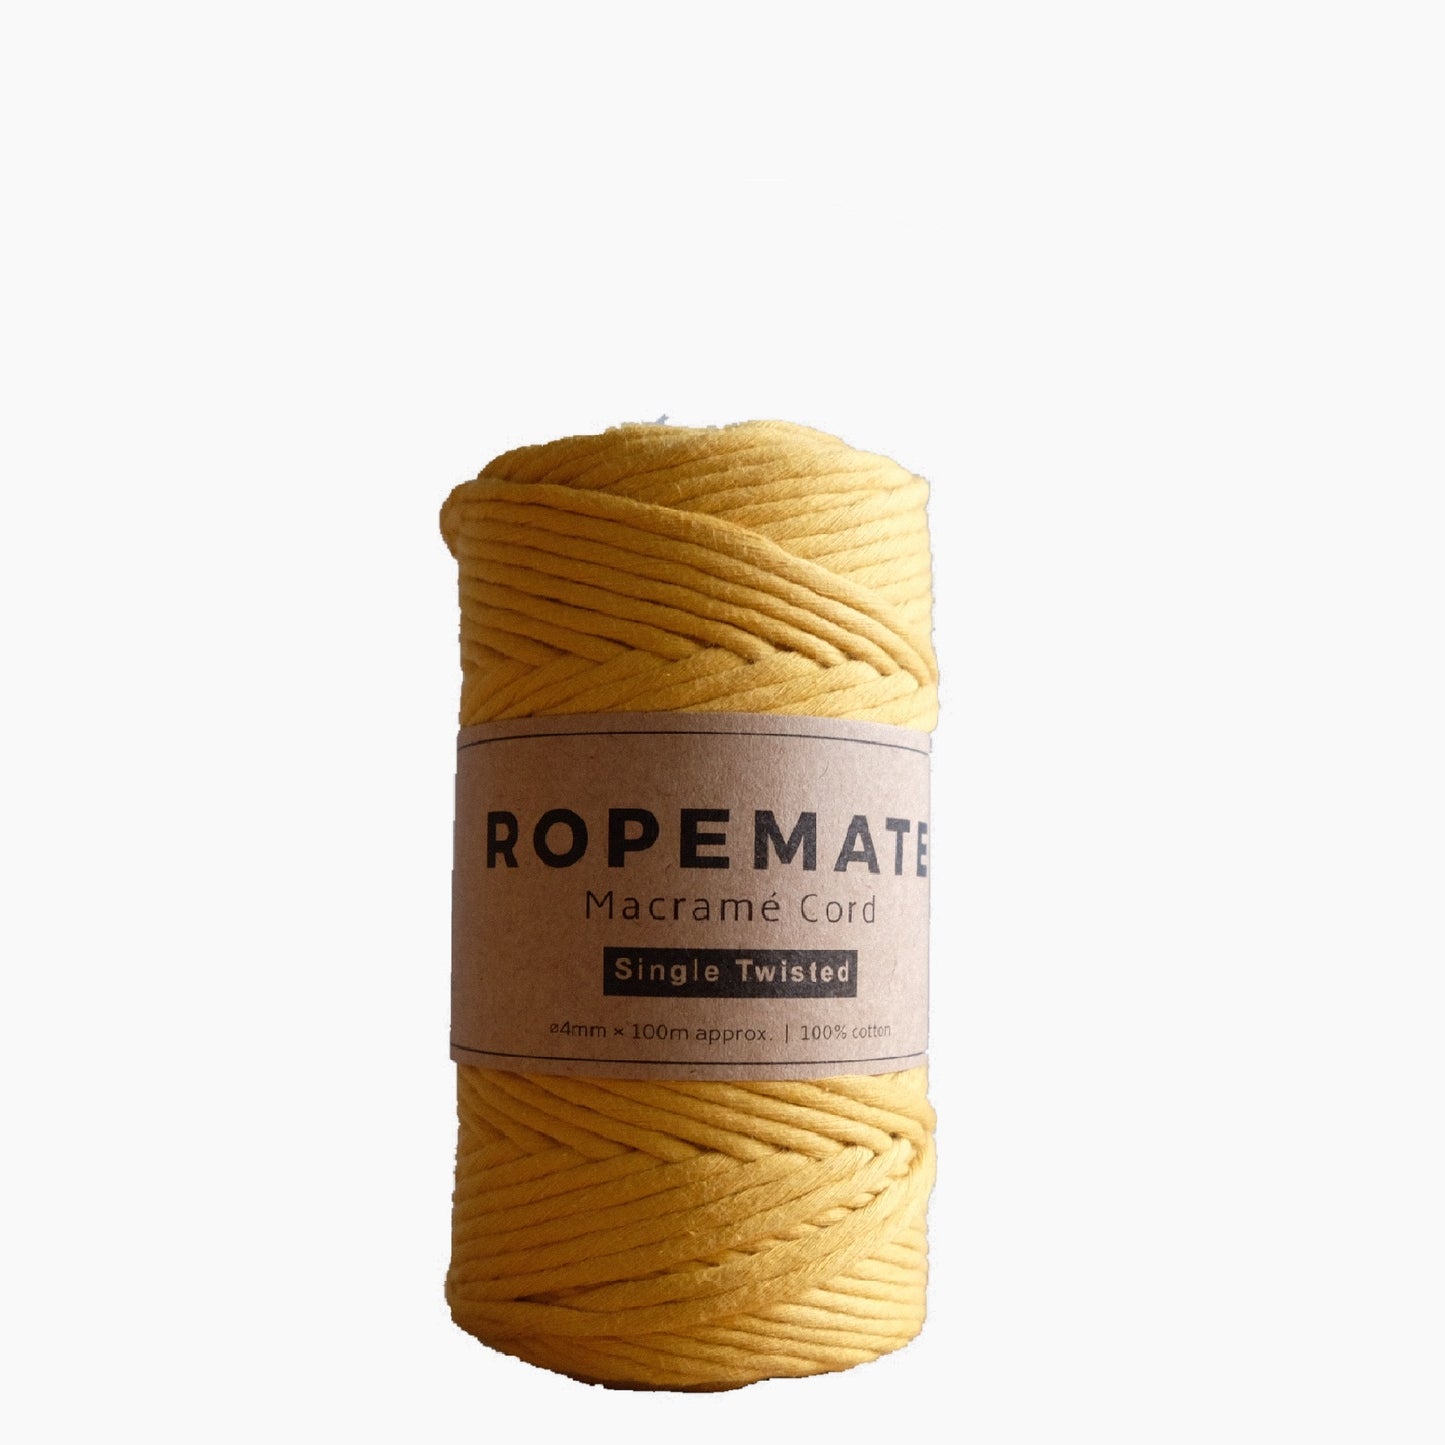 LUXE 5MM MACRAME STRING -11 COLORS – ROPEMATE Macrame